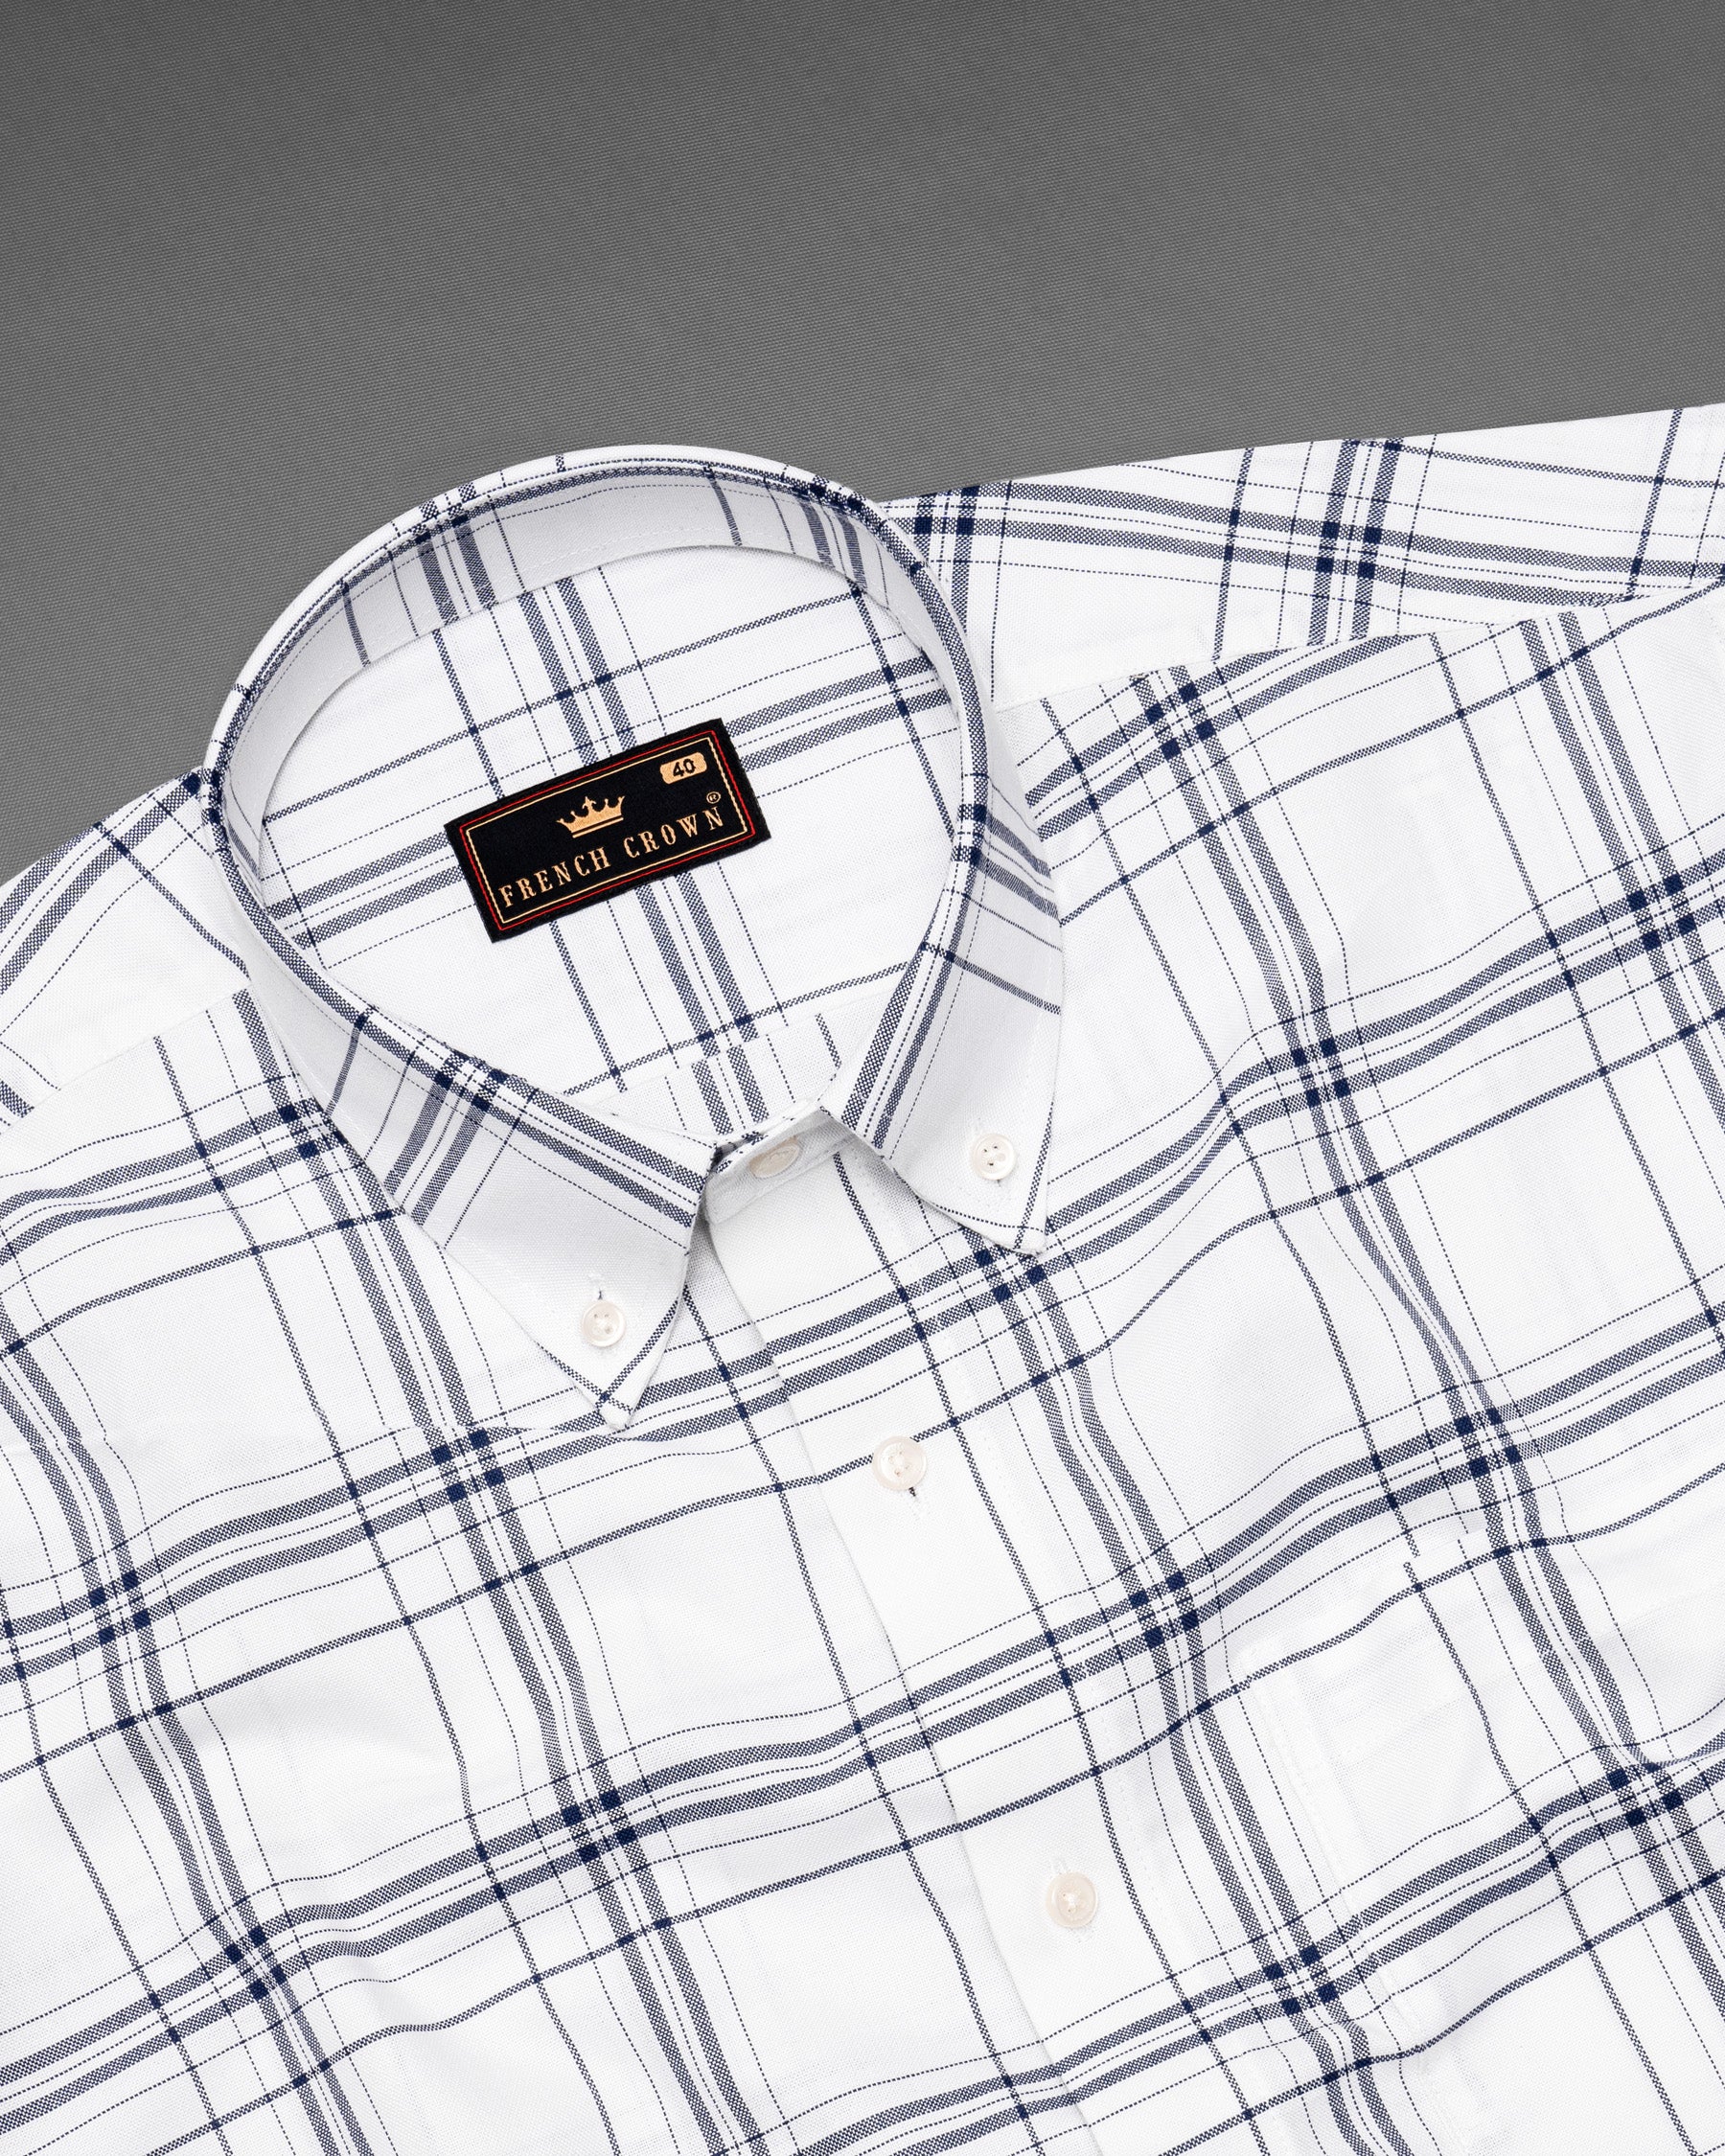 Bright White with Blue Plaid Royal Oxford Shirt 5387-BD-38, 5387-BD-H-38, 5387-BD-39, 5387-BD-H-39, 5387-BD-40, 5387-BD-H-40, 5387-BD-42, 5387-BD-H-42, 5387-BD-44, 5387-BD-H-44, 5387-BD-46, 5387-BD-H-46, 5387-BD-48, 5387-BD-H-48, 5387-BD-50, 5387-BD-H-50, 5387-BD-52, 5387-BD-H-52